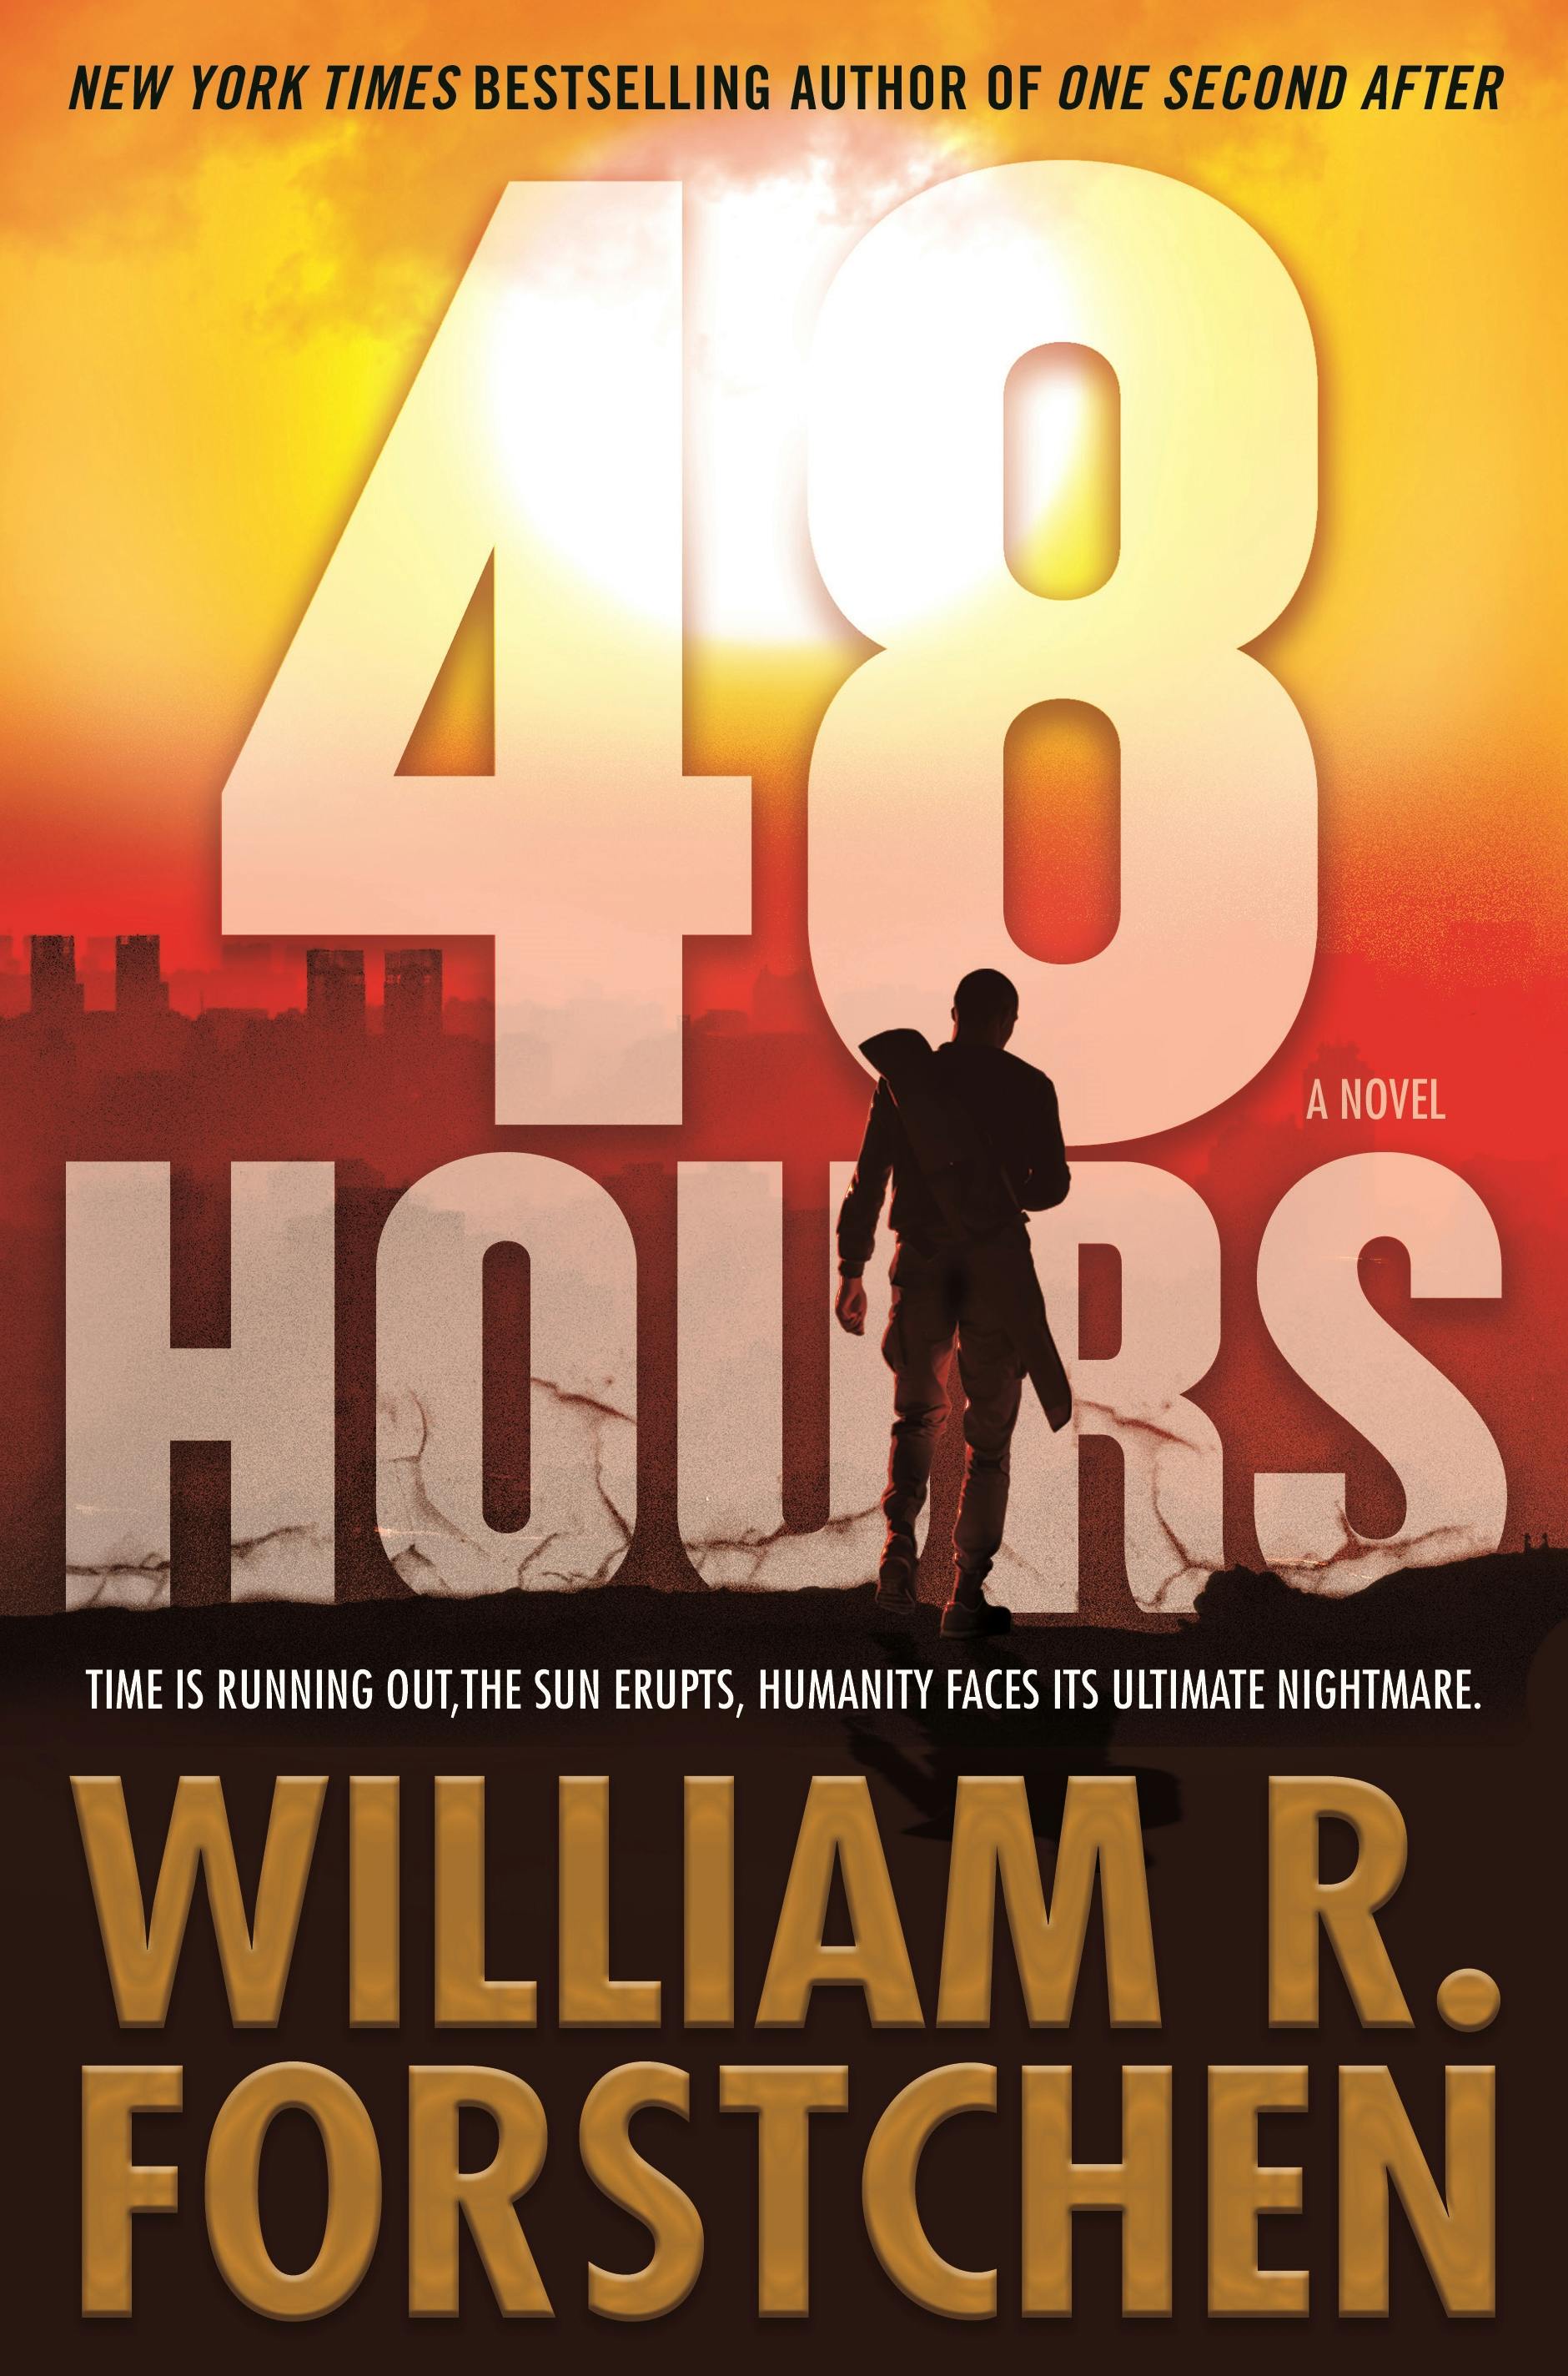 Cover for the book titled as: 48 Hours